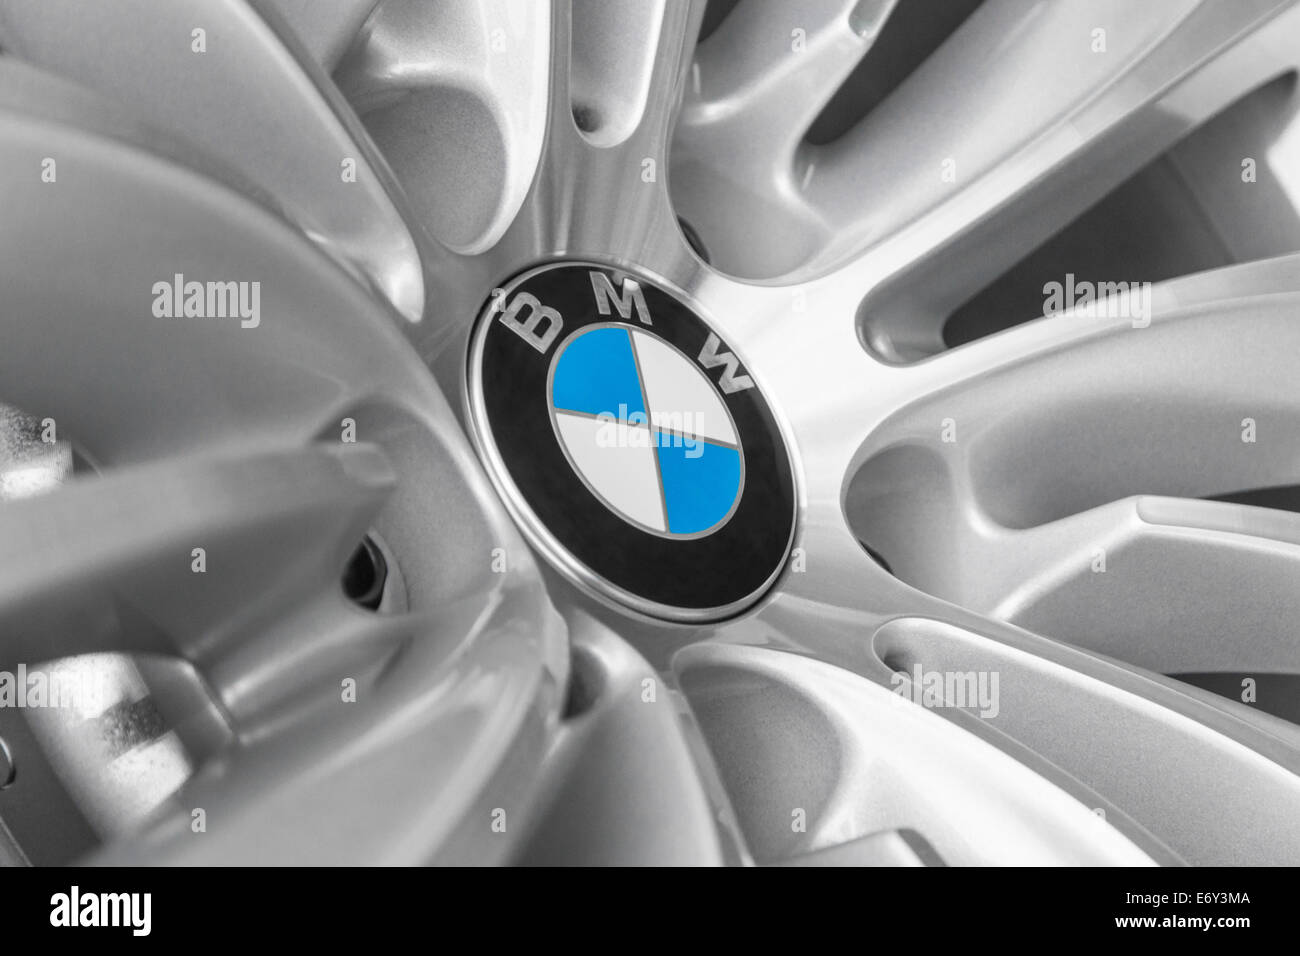 MUNICH, GERMANY - AUGUST 9, 2014: BMW European automobile manufacturer logotype on light alloy new design wheel for modern model Stock Photo